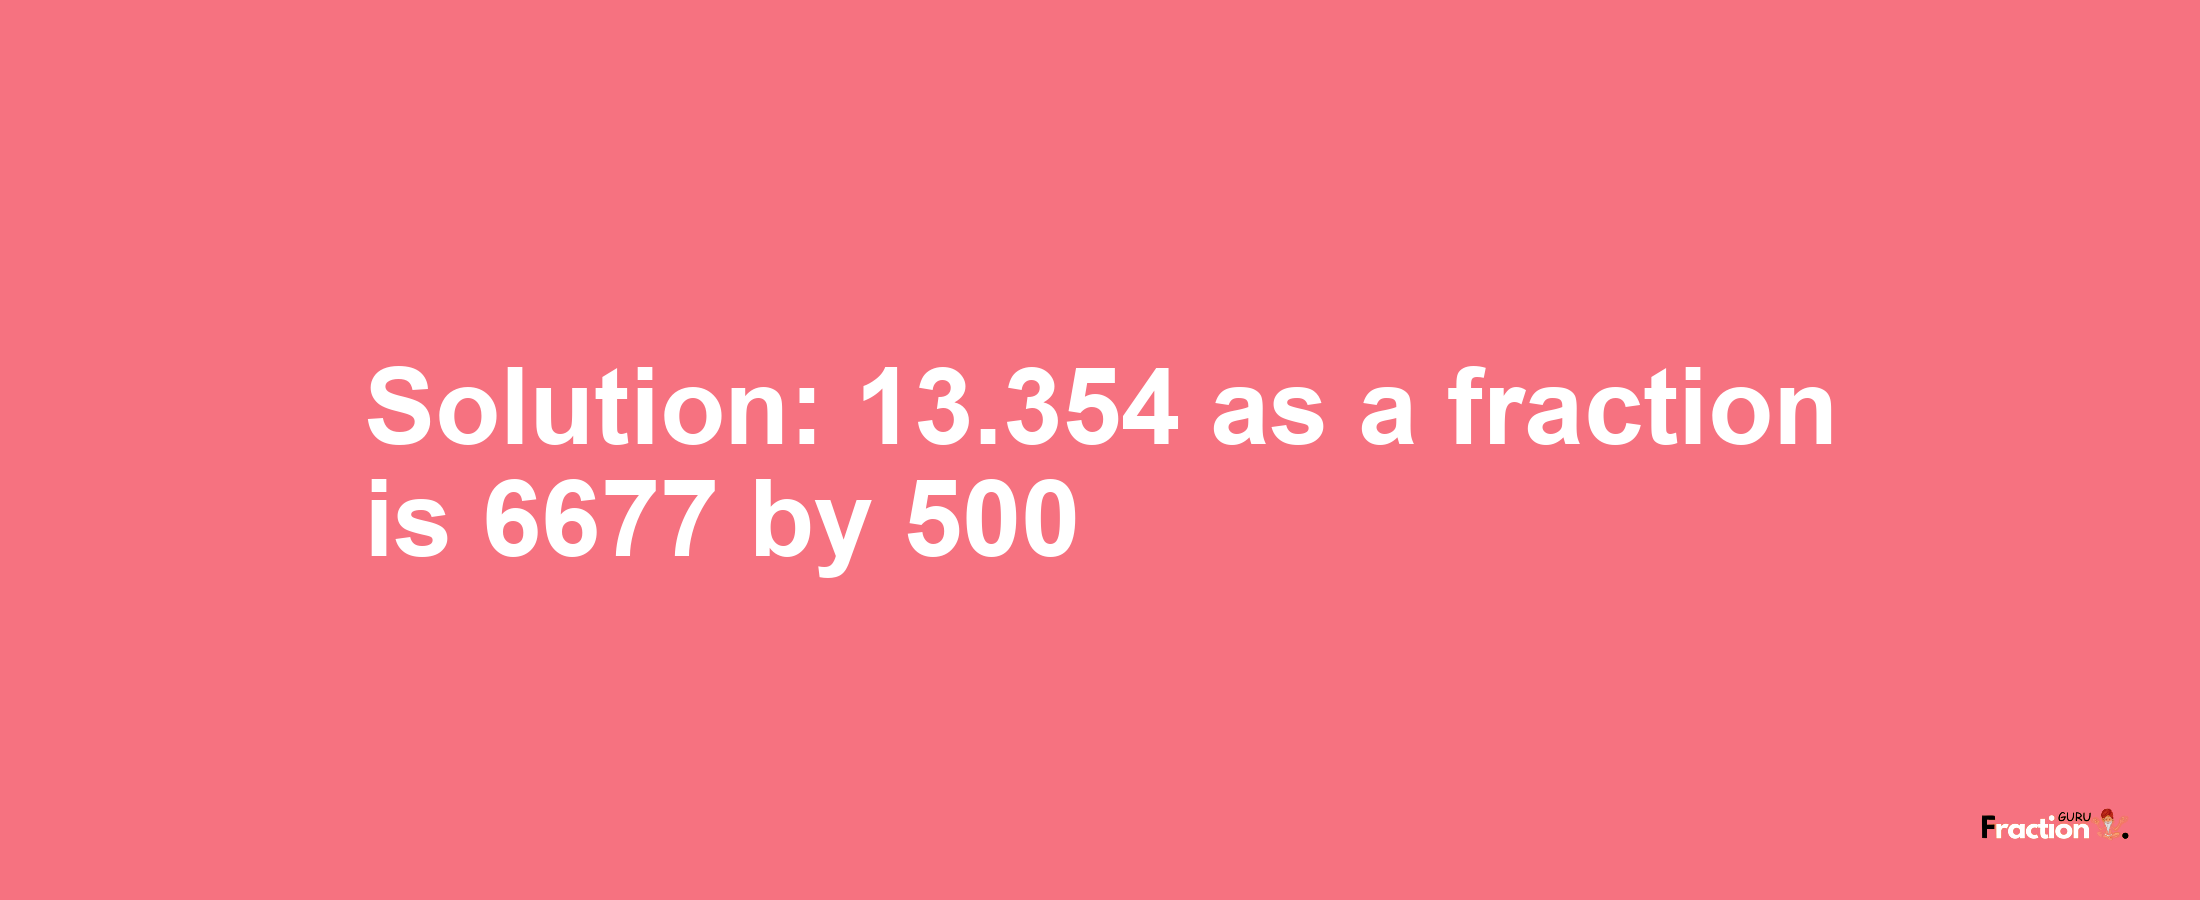 Solution:13.354 as a fraction is 6677/500